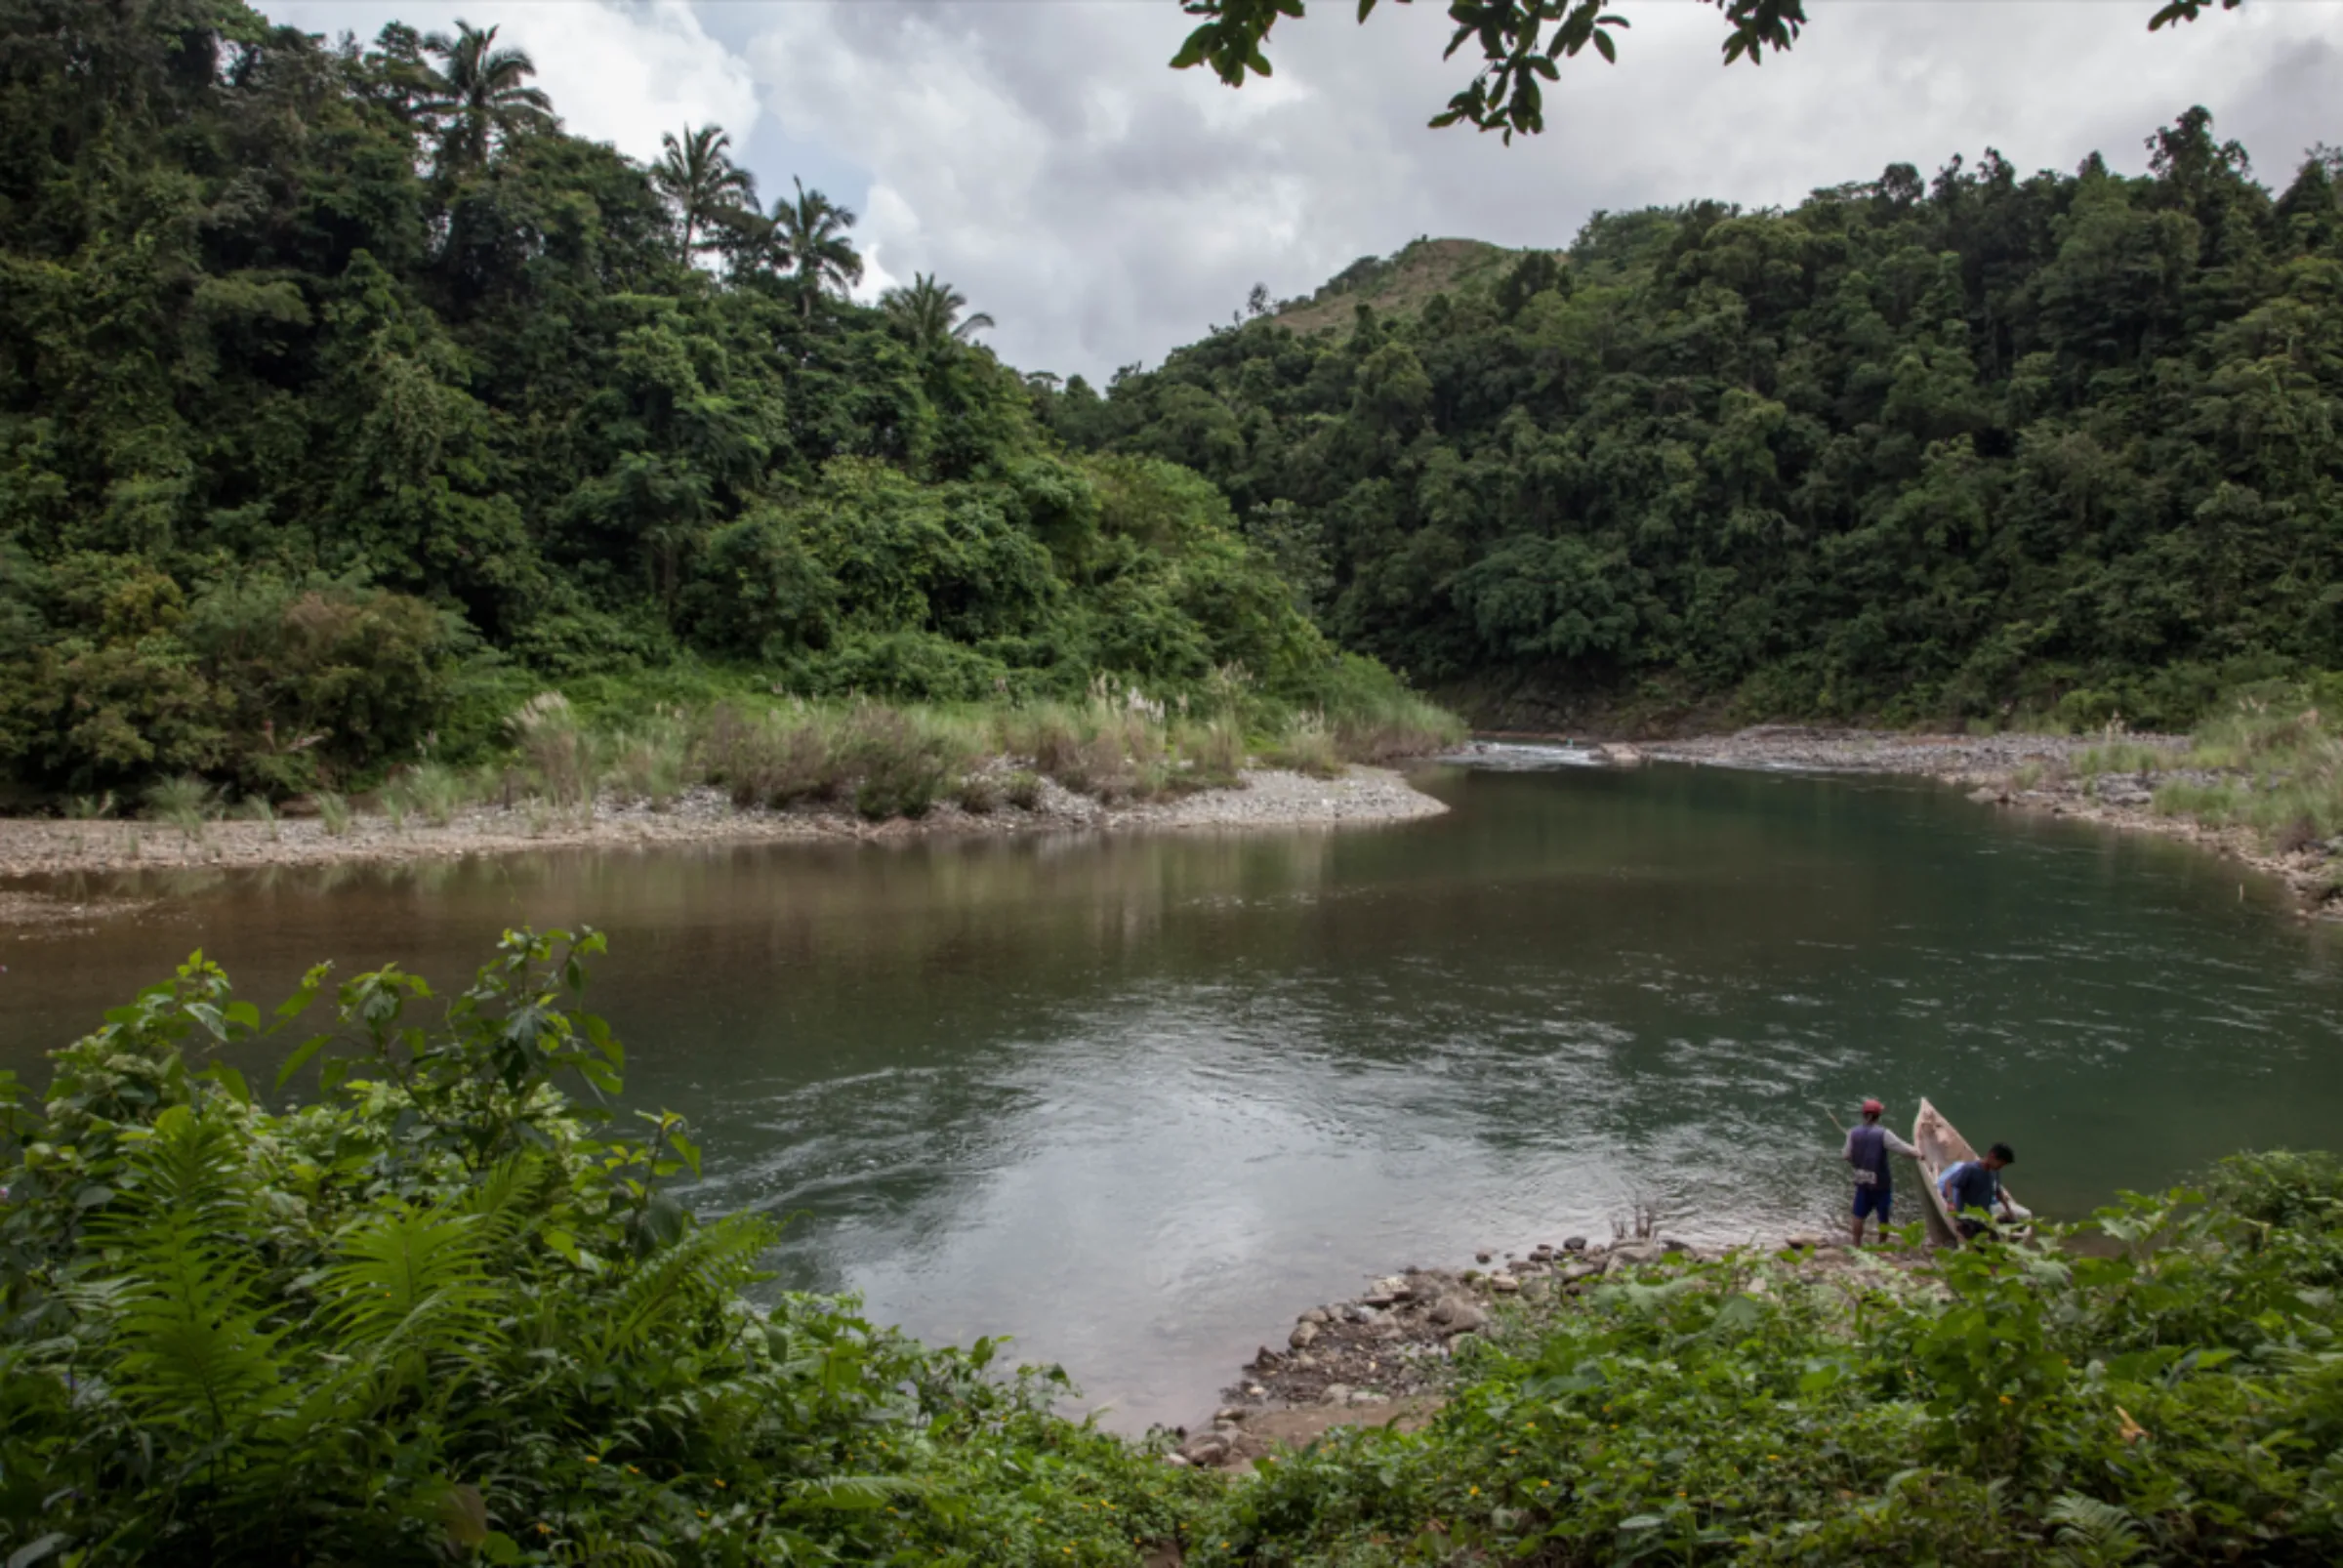 The ground zero of the proposed Kaliwa Dam project, where the Kaliwa and Kanan rivers meet to flow to the larger Agos River in Sitio Baykuran, General Nakar, Quezon, November 11, 2019